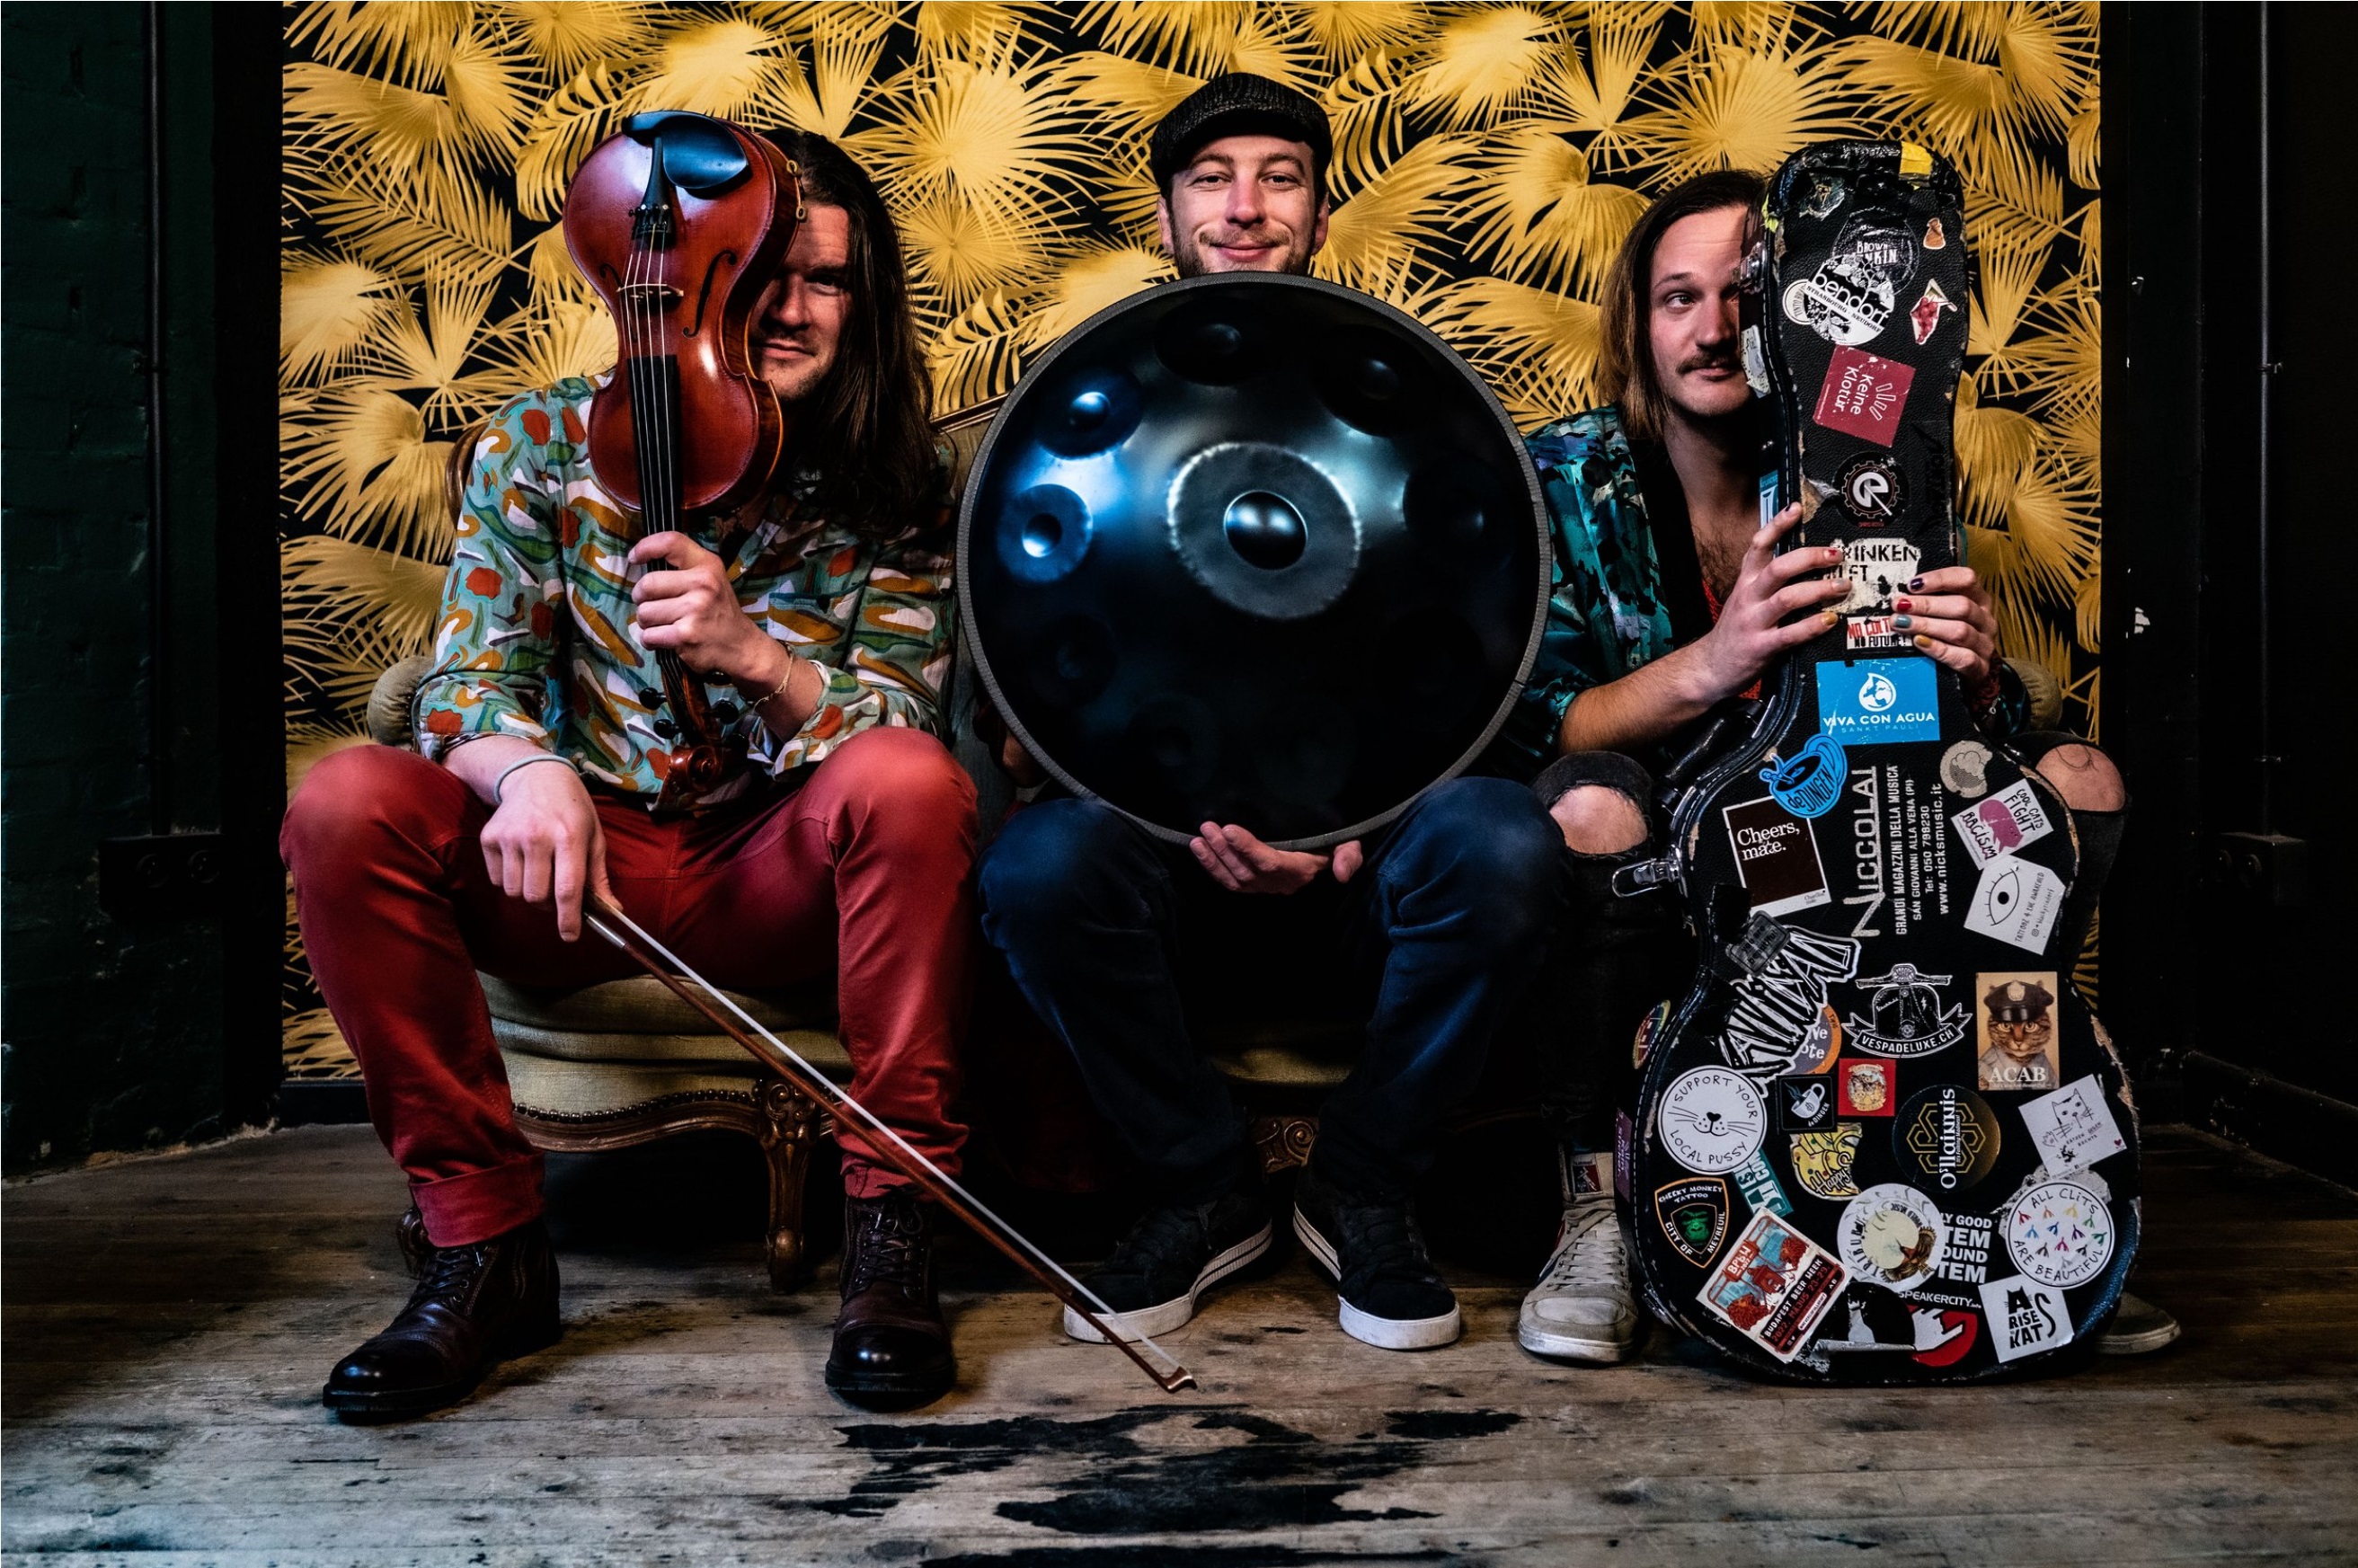 The Trouble Notes Celebrate Fusing Cultures in New Song “Mayahuel” for Dia de Los Muertos